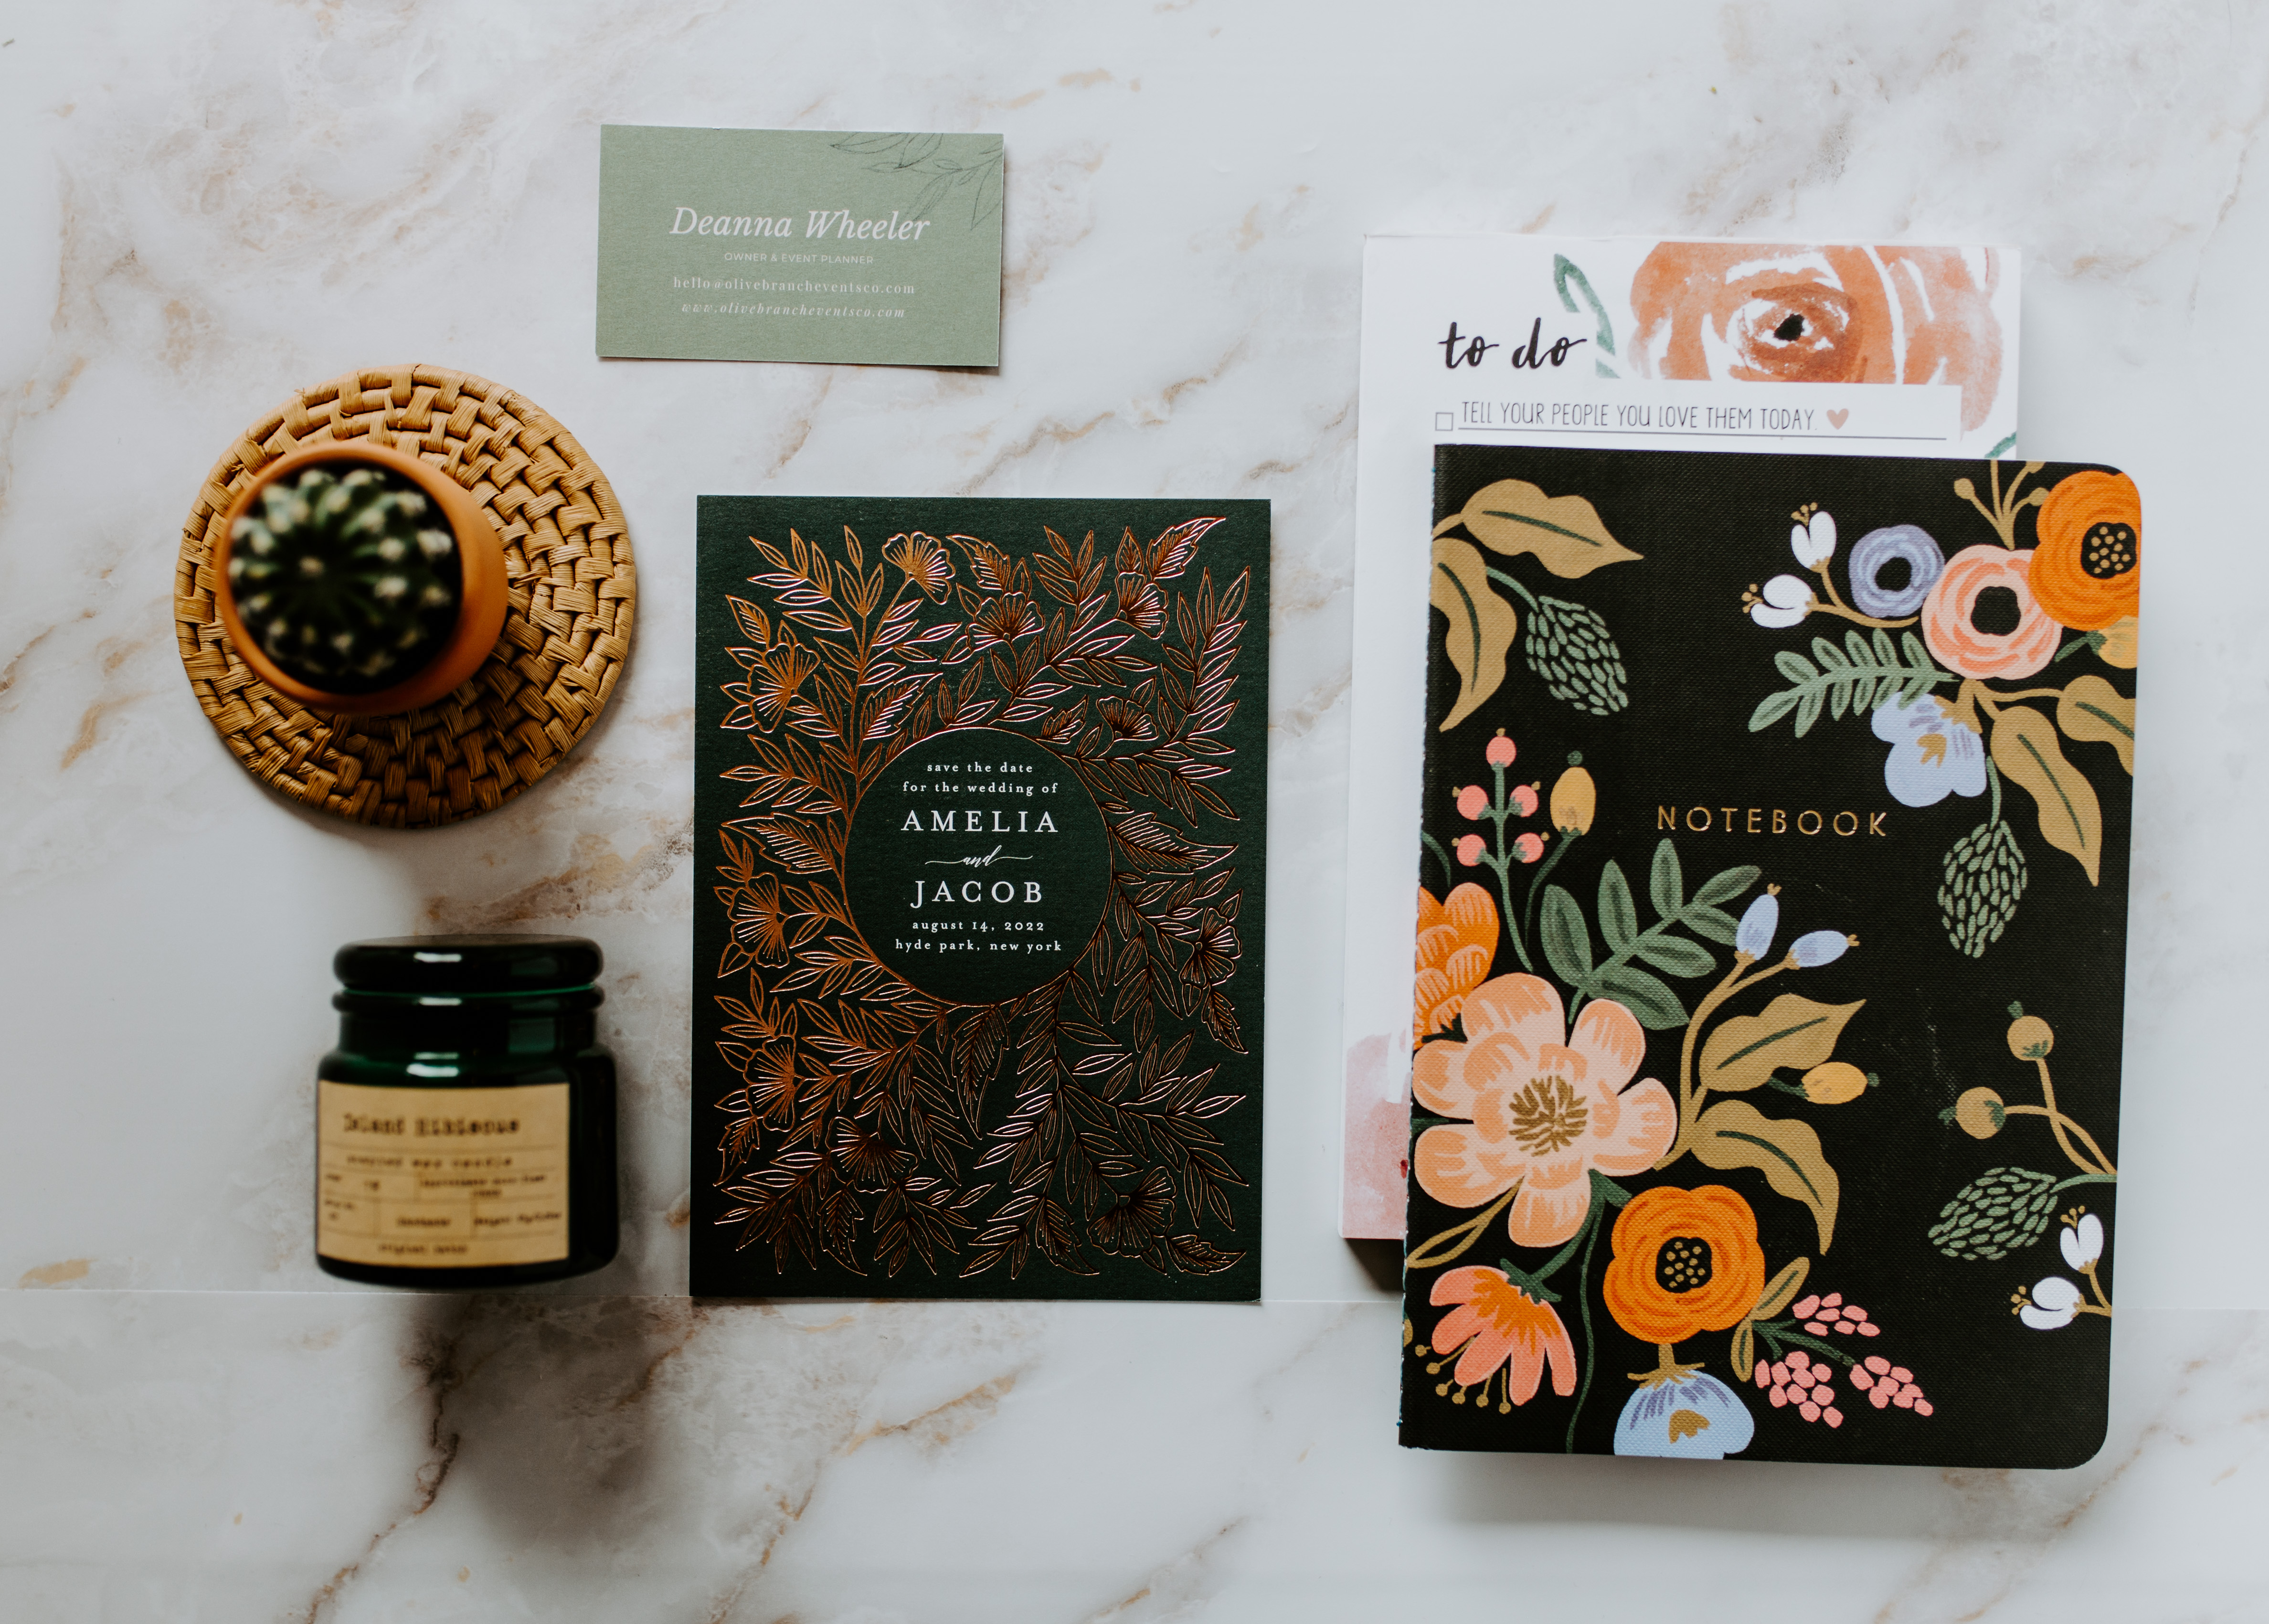 Olive Branch Events Co. Flatlay